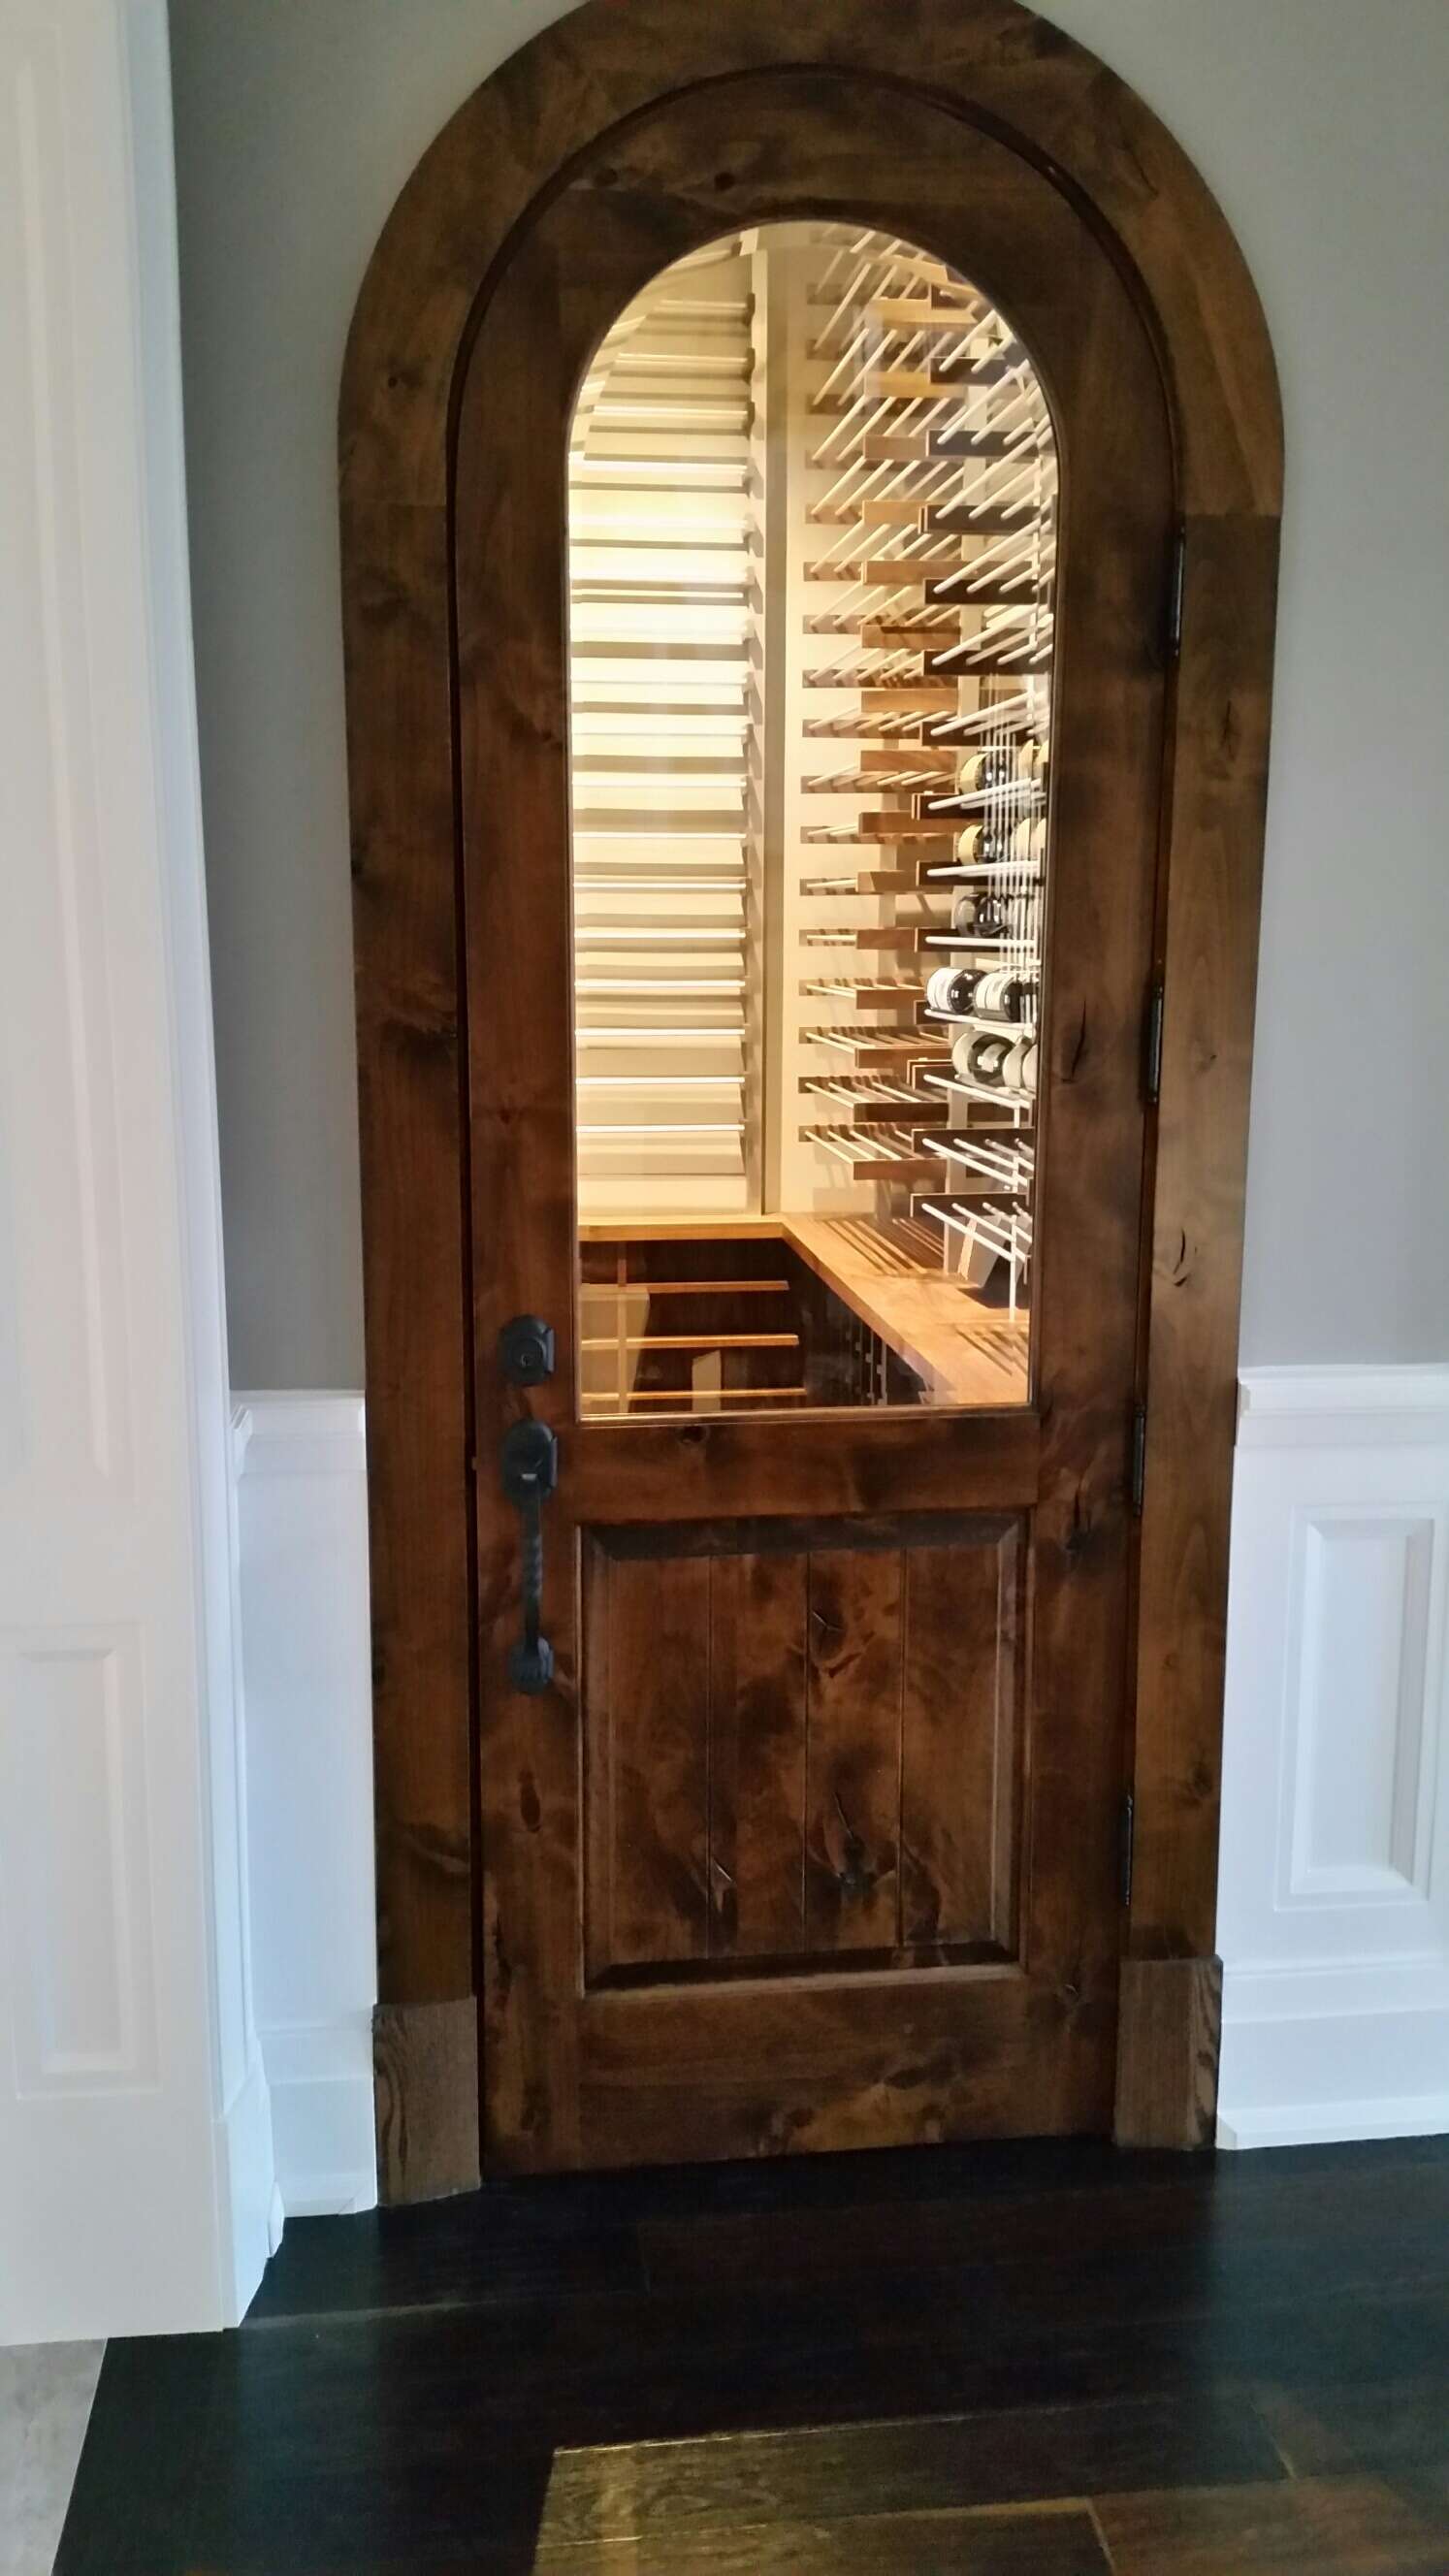 Custom wine room featuring ductable cooling system, EVO racking system and cabinetry.